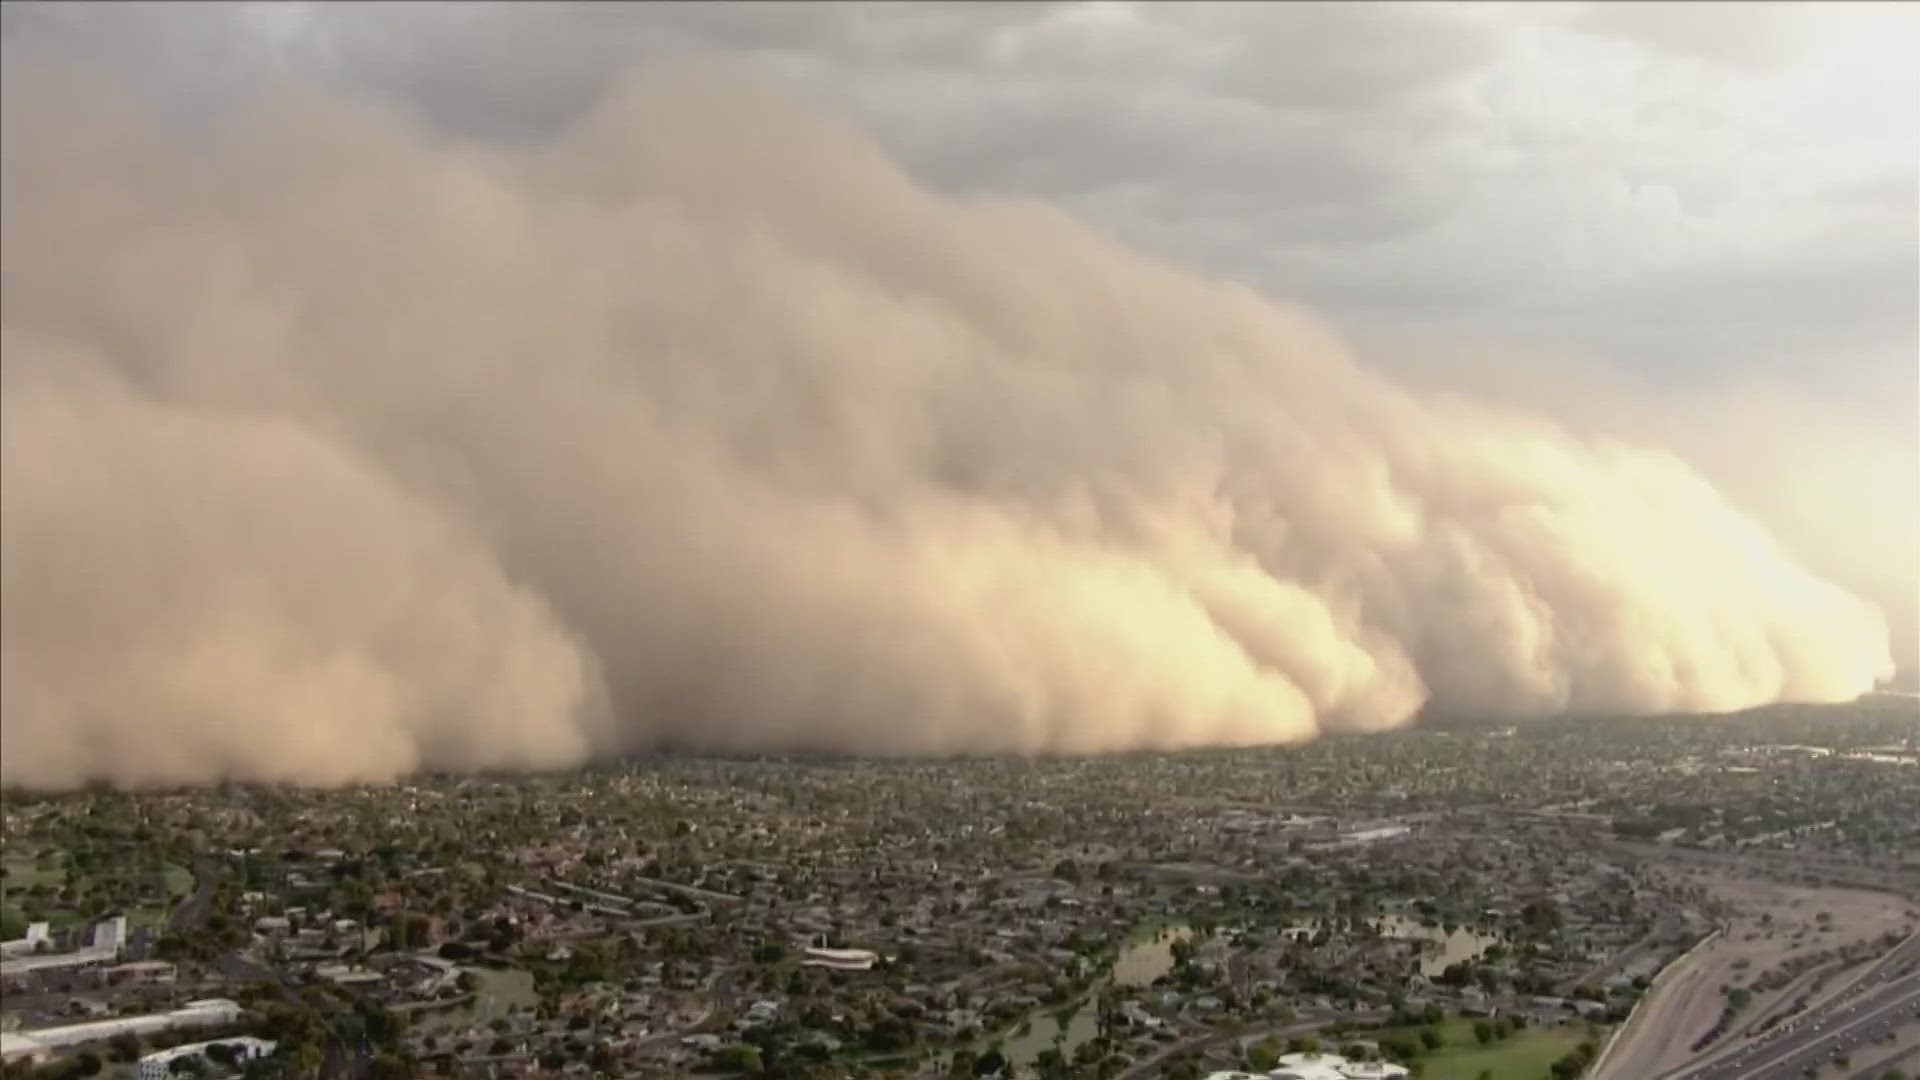 A new study shows dust storms are 200 times deadlier than previously thought.